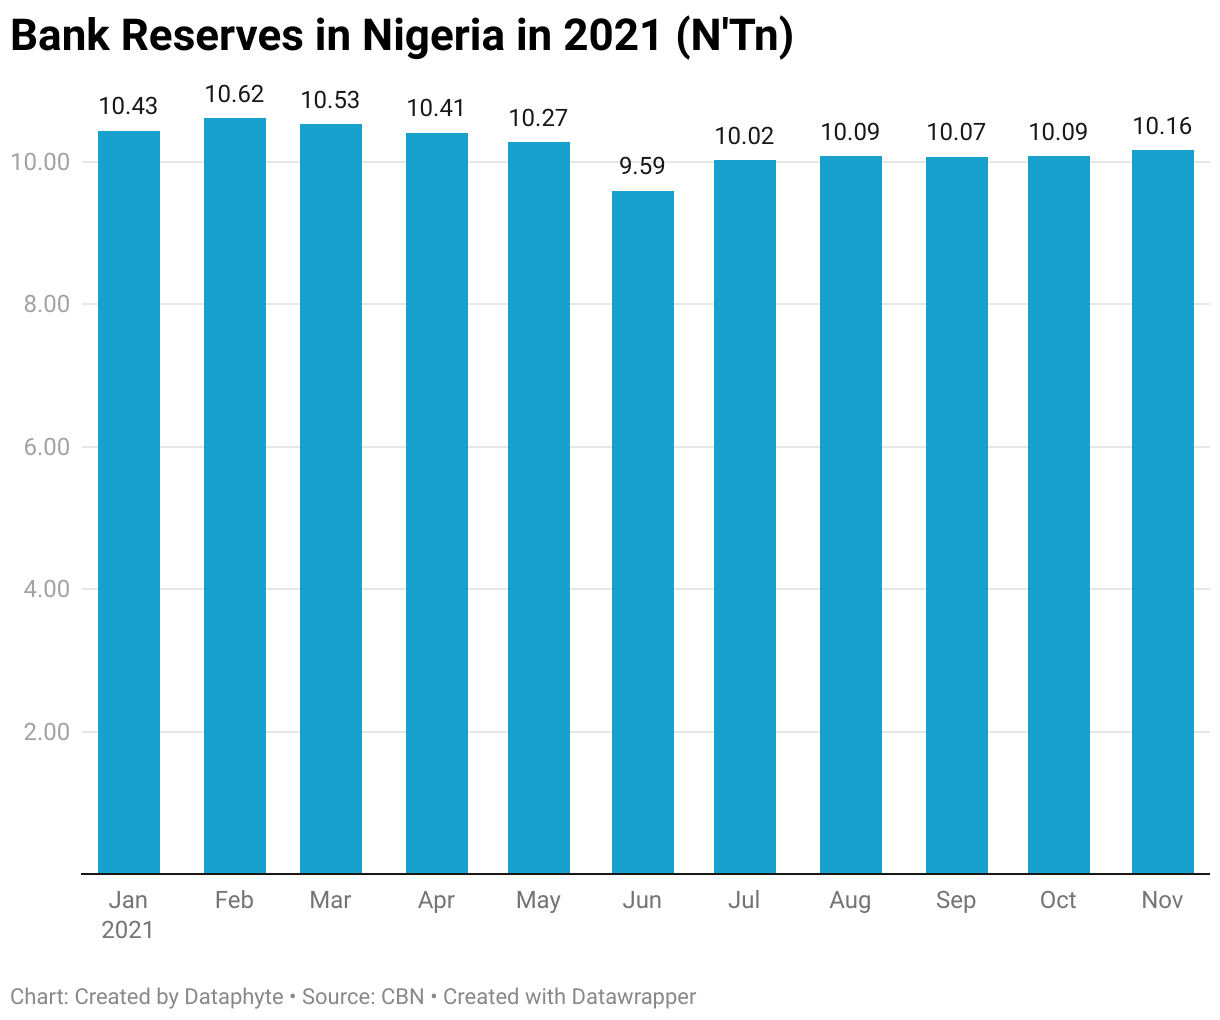 #ChartoftheDay: Banks had an Average Monthly Reserve of N10.21 Trillion in 2021